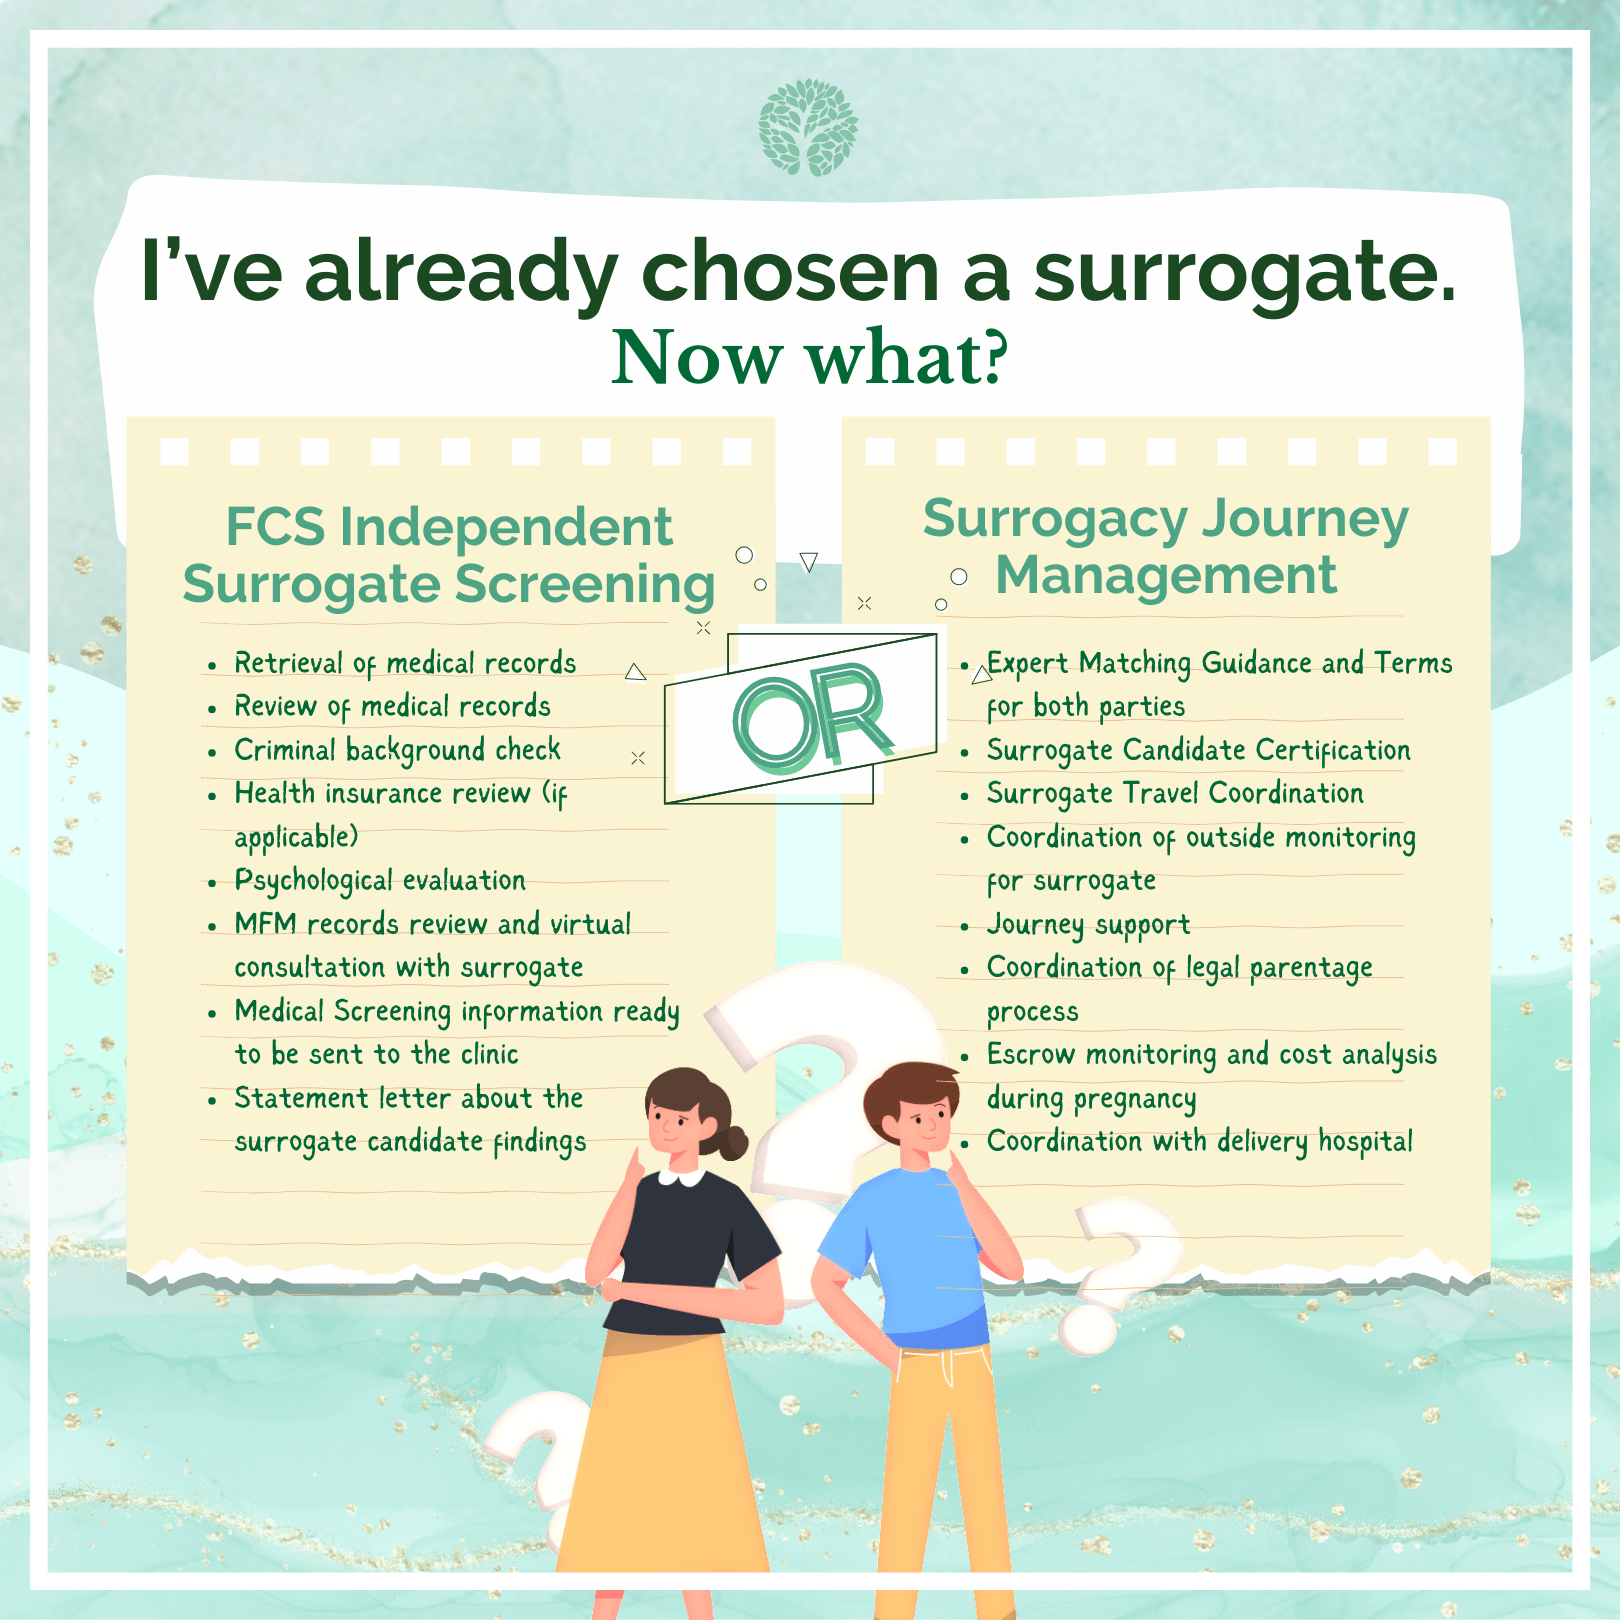 I've already chosen a surrogate. Now what? FCS Independent Surrogate Screening OR Surrogacy Journey Management, listed benefits of each, couple wondering "now what?" FCS logo